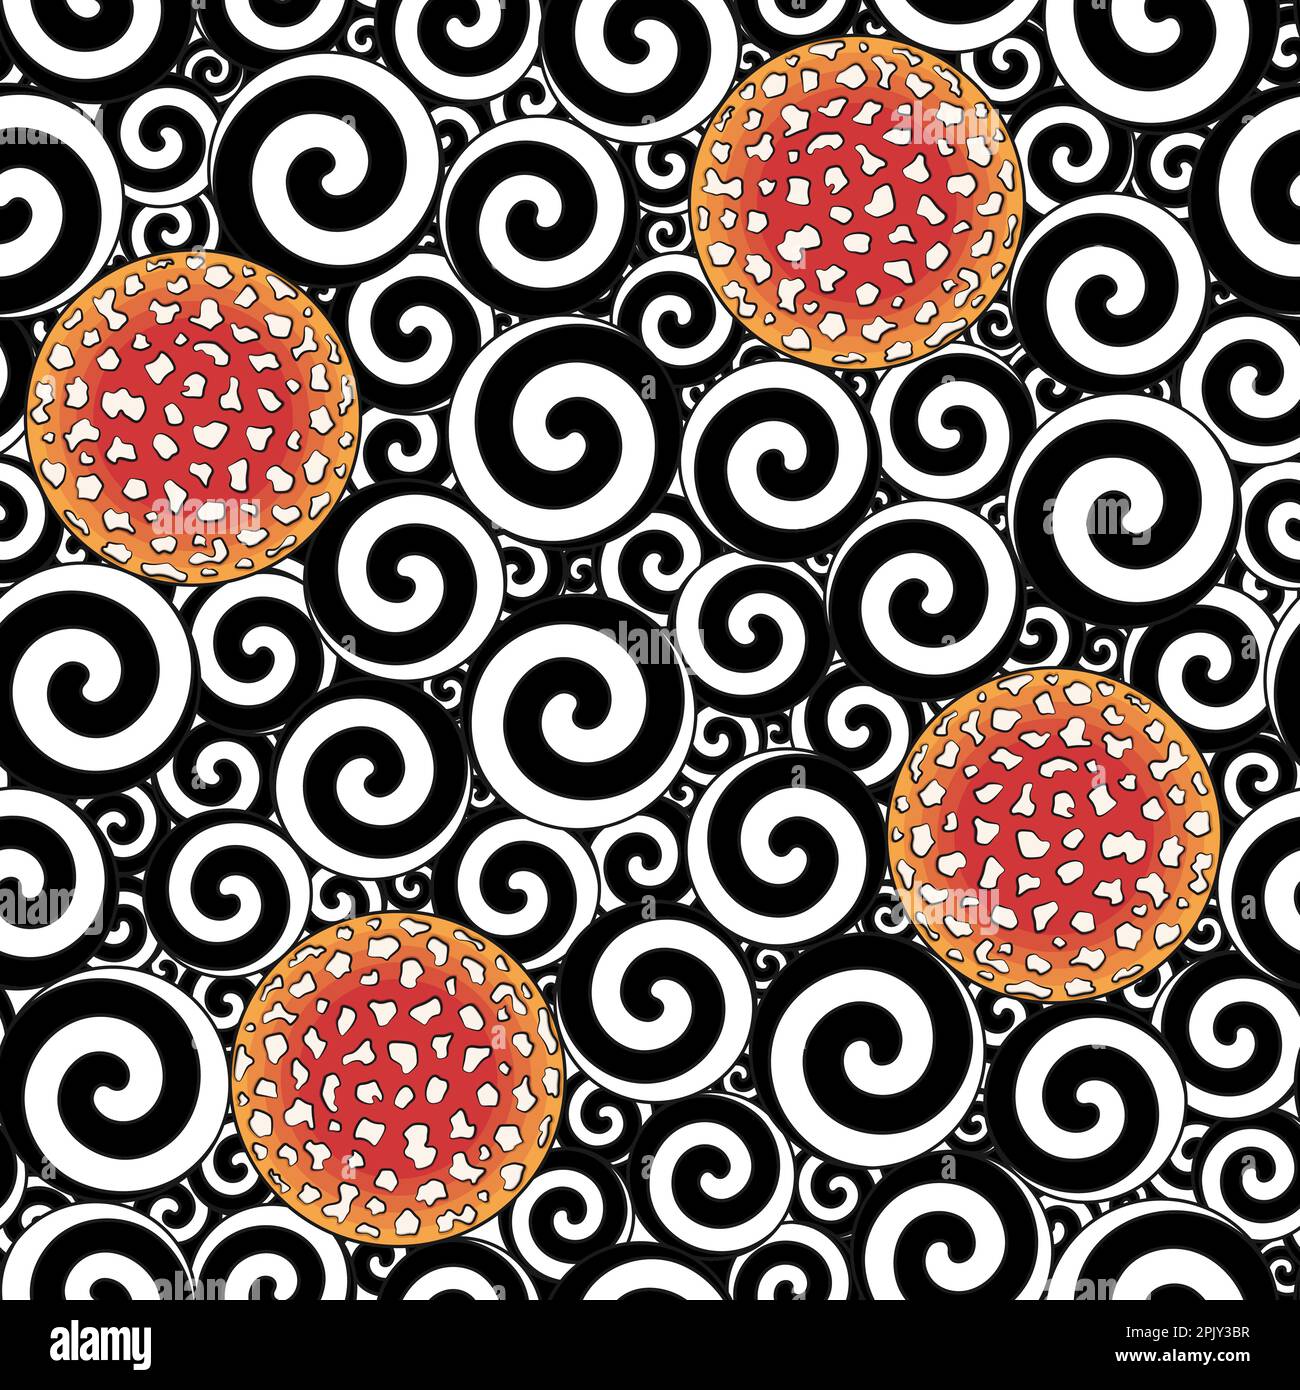 Seamless pattern with black and white swirls and caps of fly agaric mushroom. Color vector background. Stock Vector